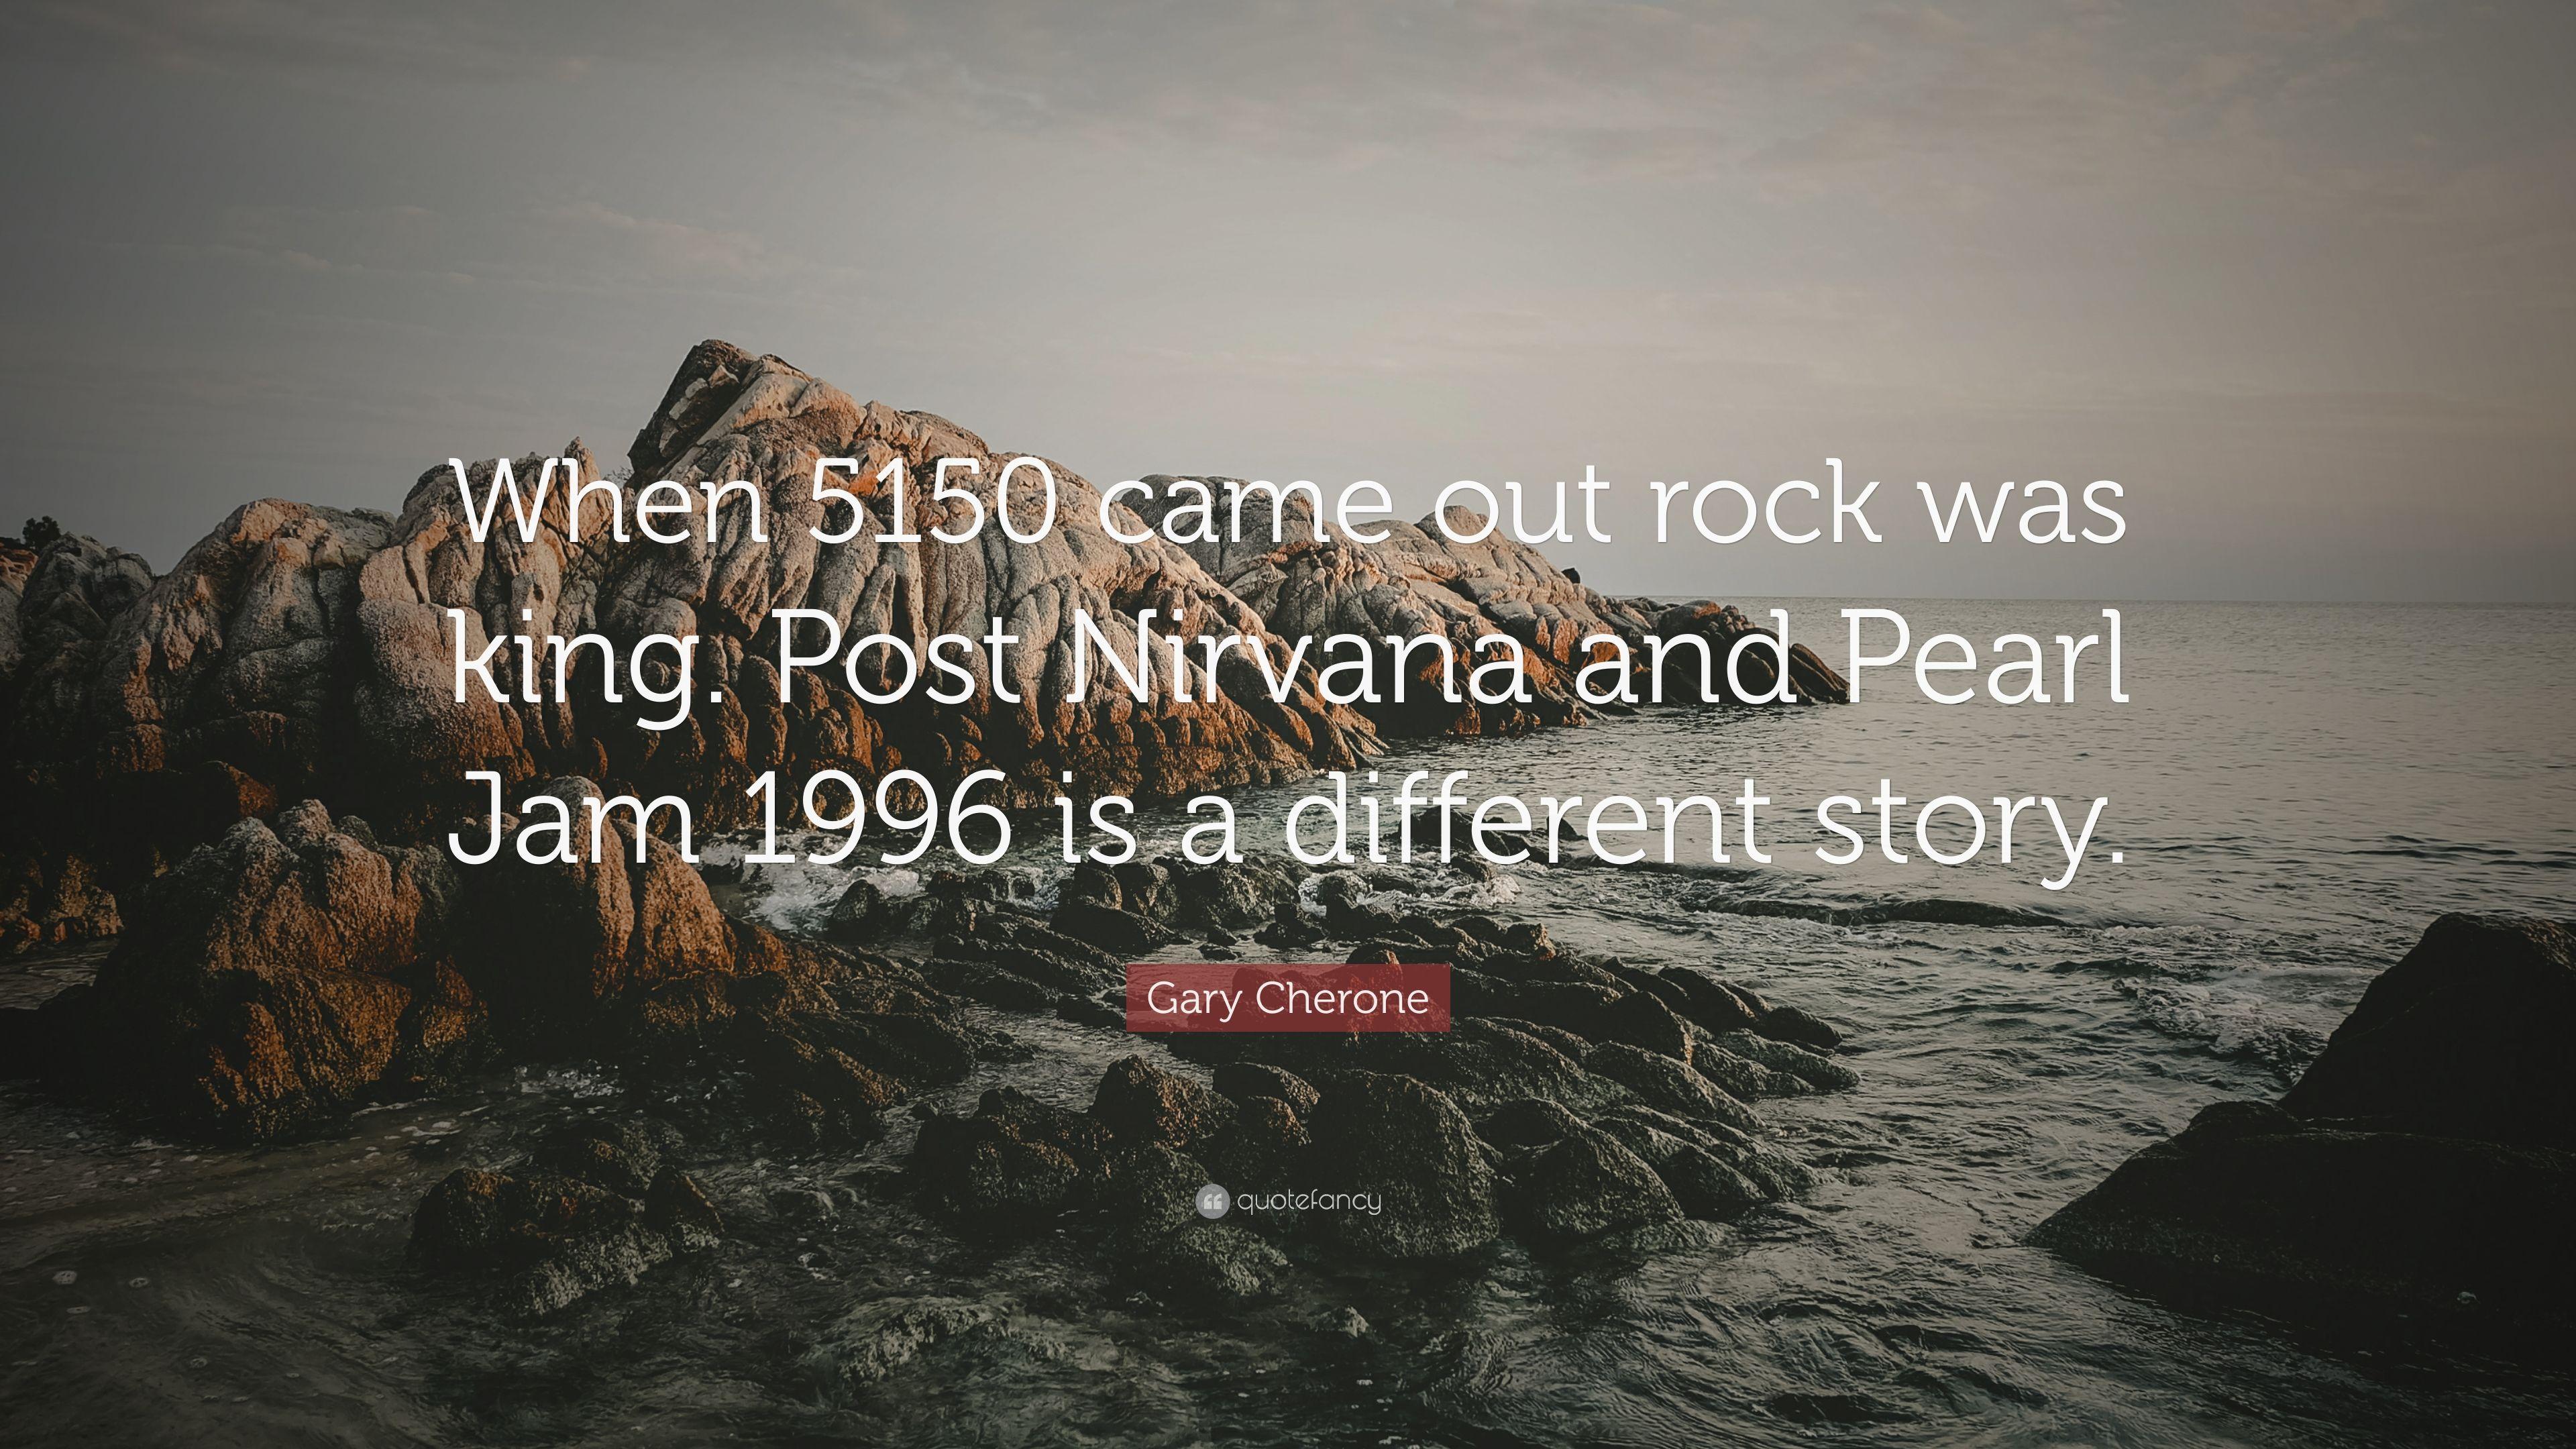 Gary Cherone Quote: “When 5150 came out rock was king. Post Nirvana